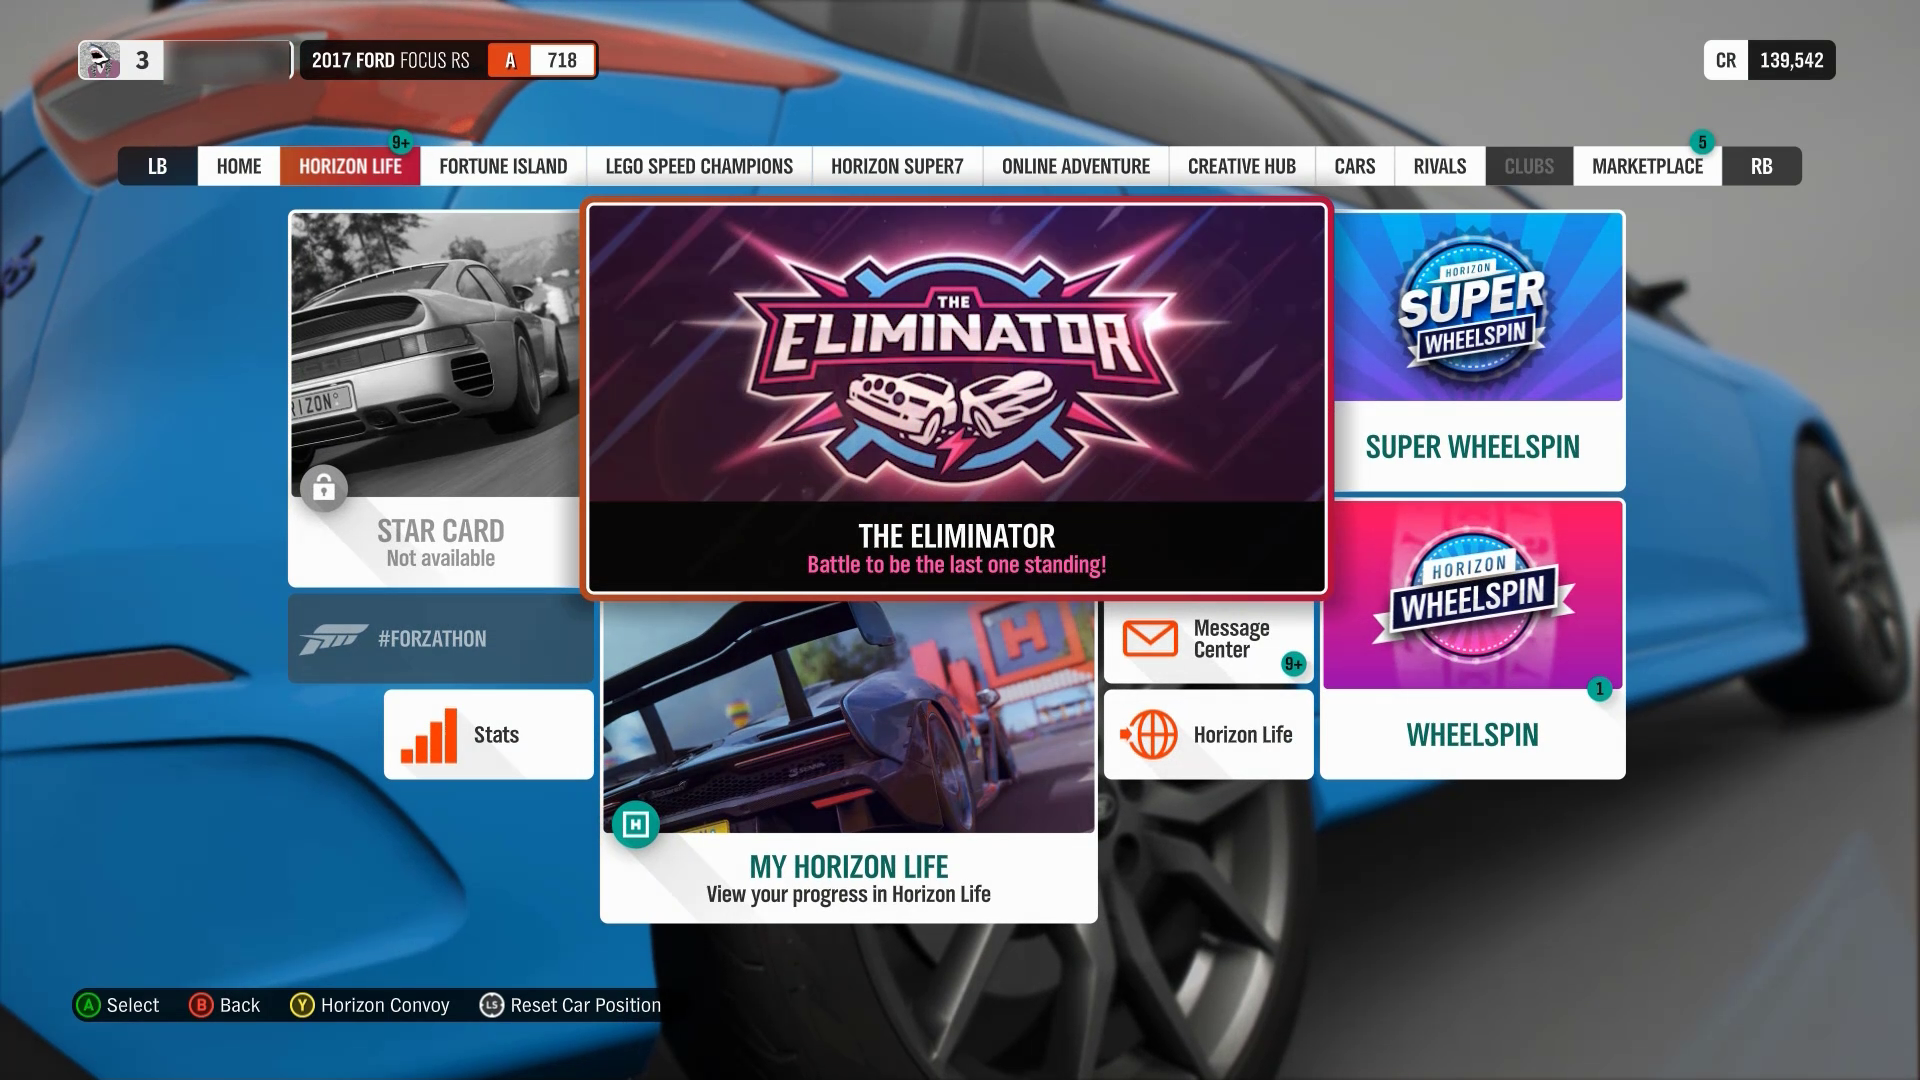 A screenshot from Forza Horizon 4, showing the main menu. The "Horizon Life" tab is selected, and a number of tiles are shown on screen. A tile entitled "The Eliminator" is selected.